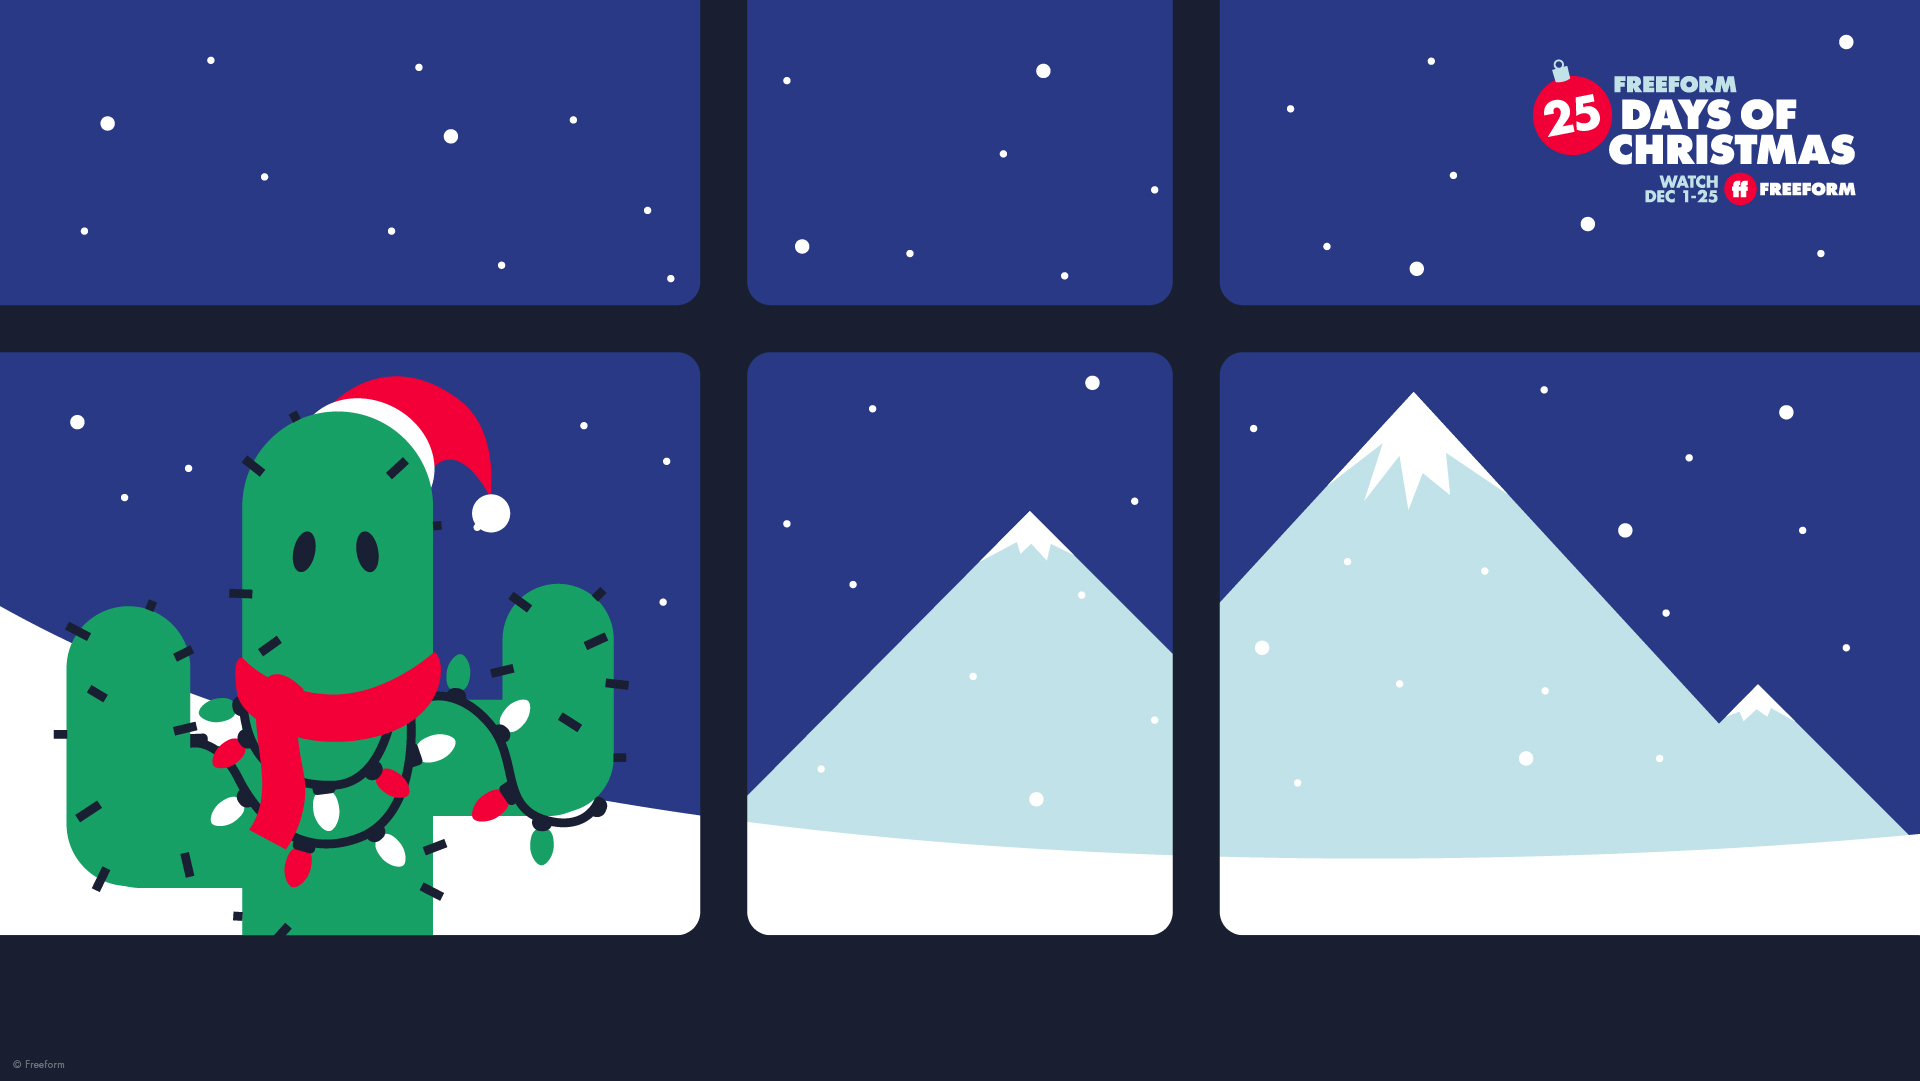 Download Custom 25 Days of Christmas Backgrounds For Video Calls & Meetings  | Freeform Updates